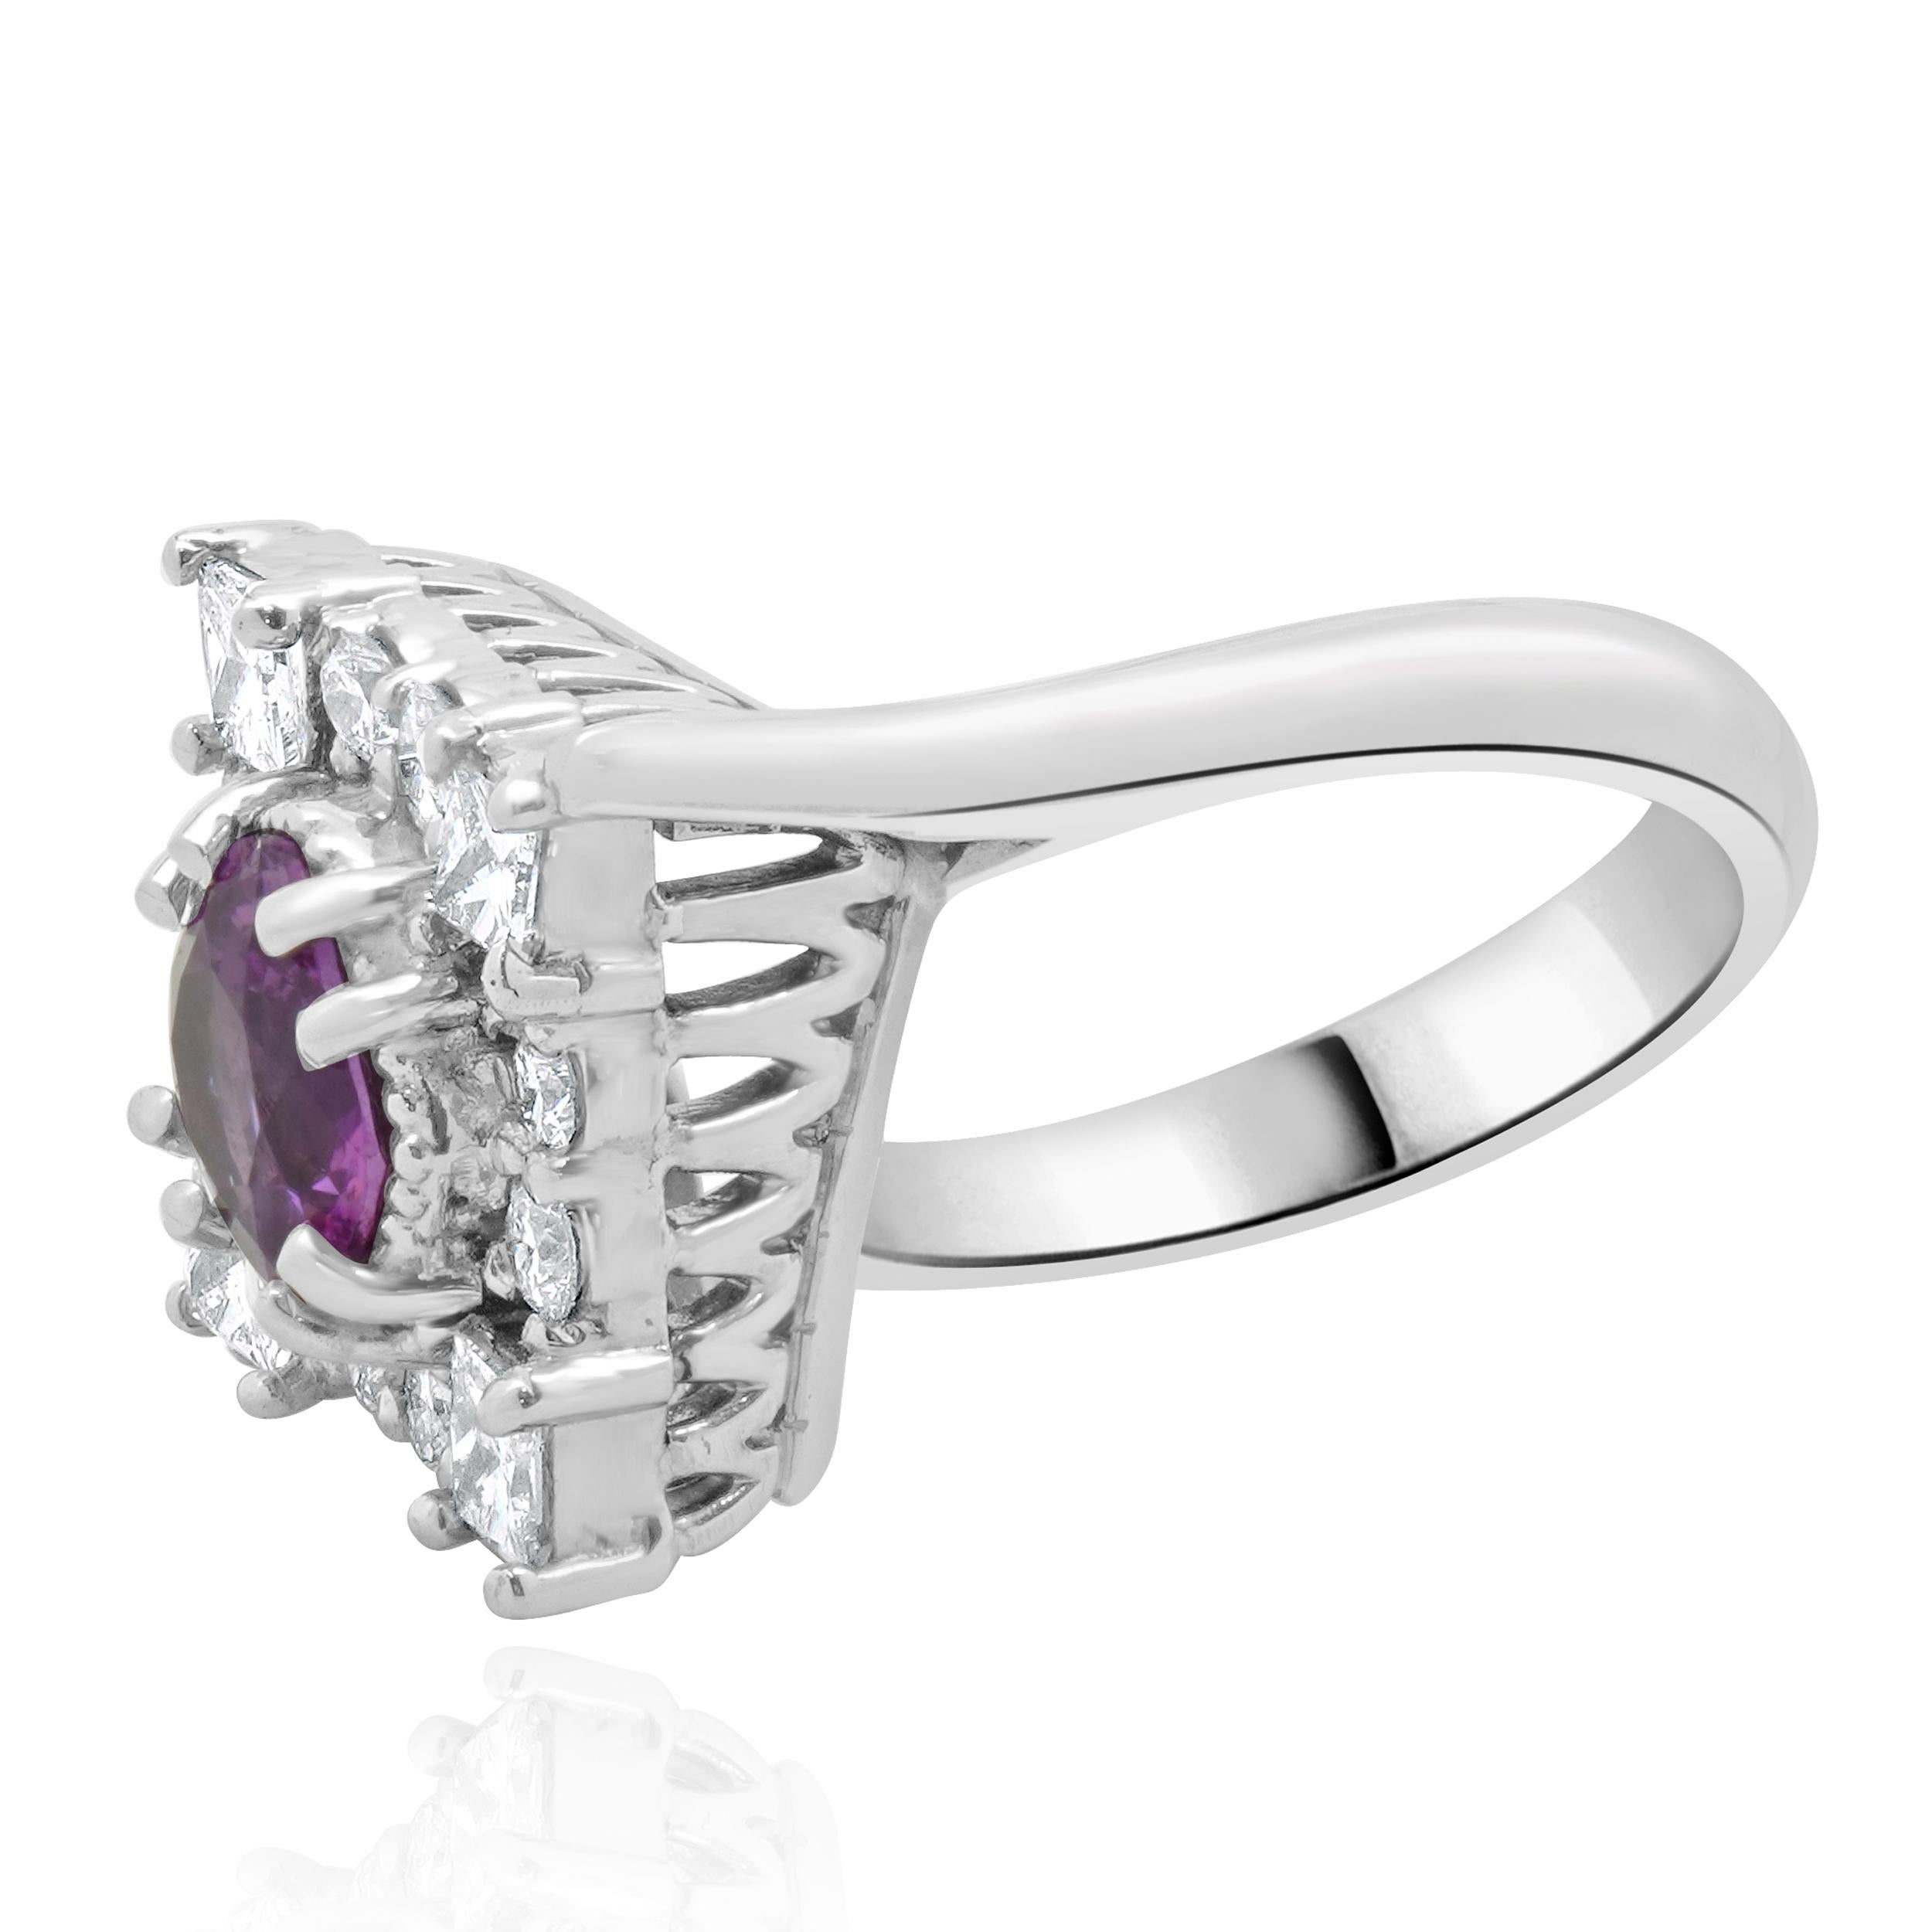 Designer: custom
Material: 14K white gold
Diamond:  round brilliant cut = 1.71cttw
Color: G
Clarity: SI1
Pink Sapphires:  0.96cttw
Ring Size: 7 (please allow two extra shipping days for sizing requests) 
Weight: 10.14 grams
